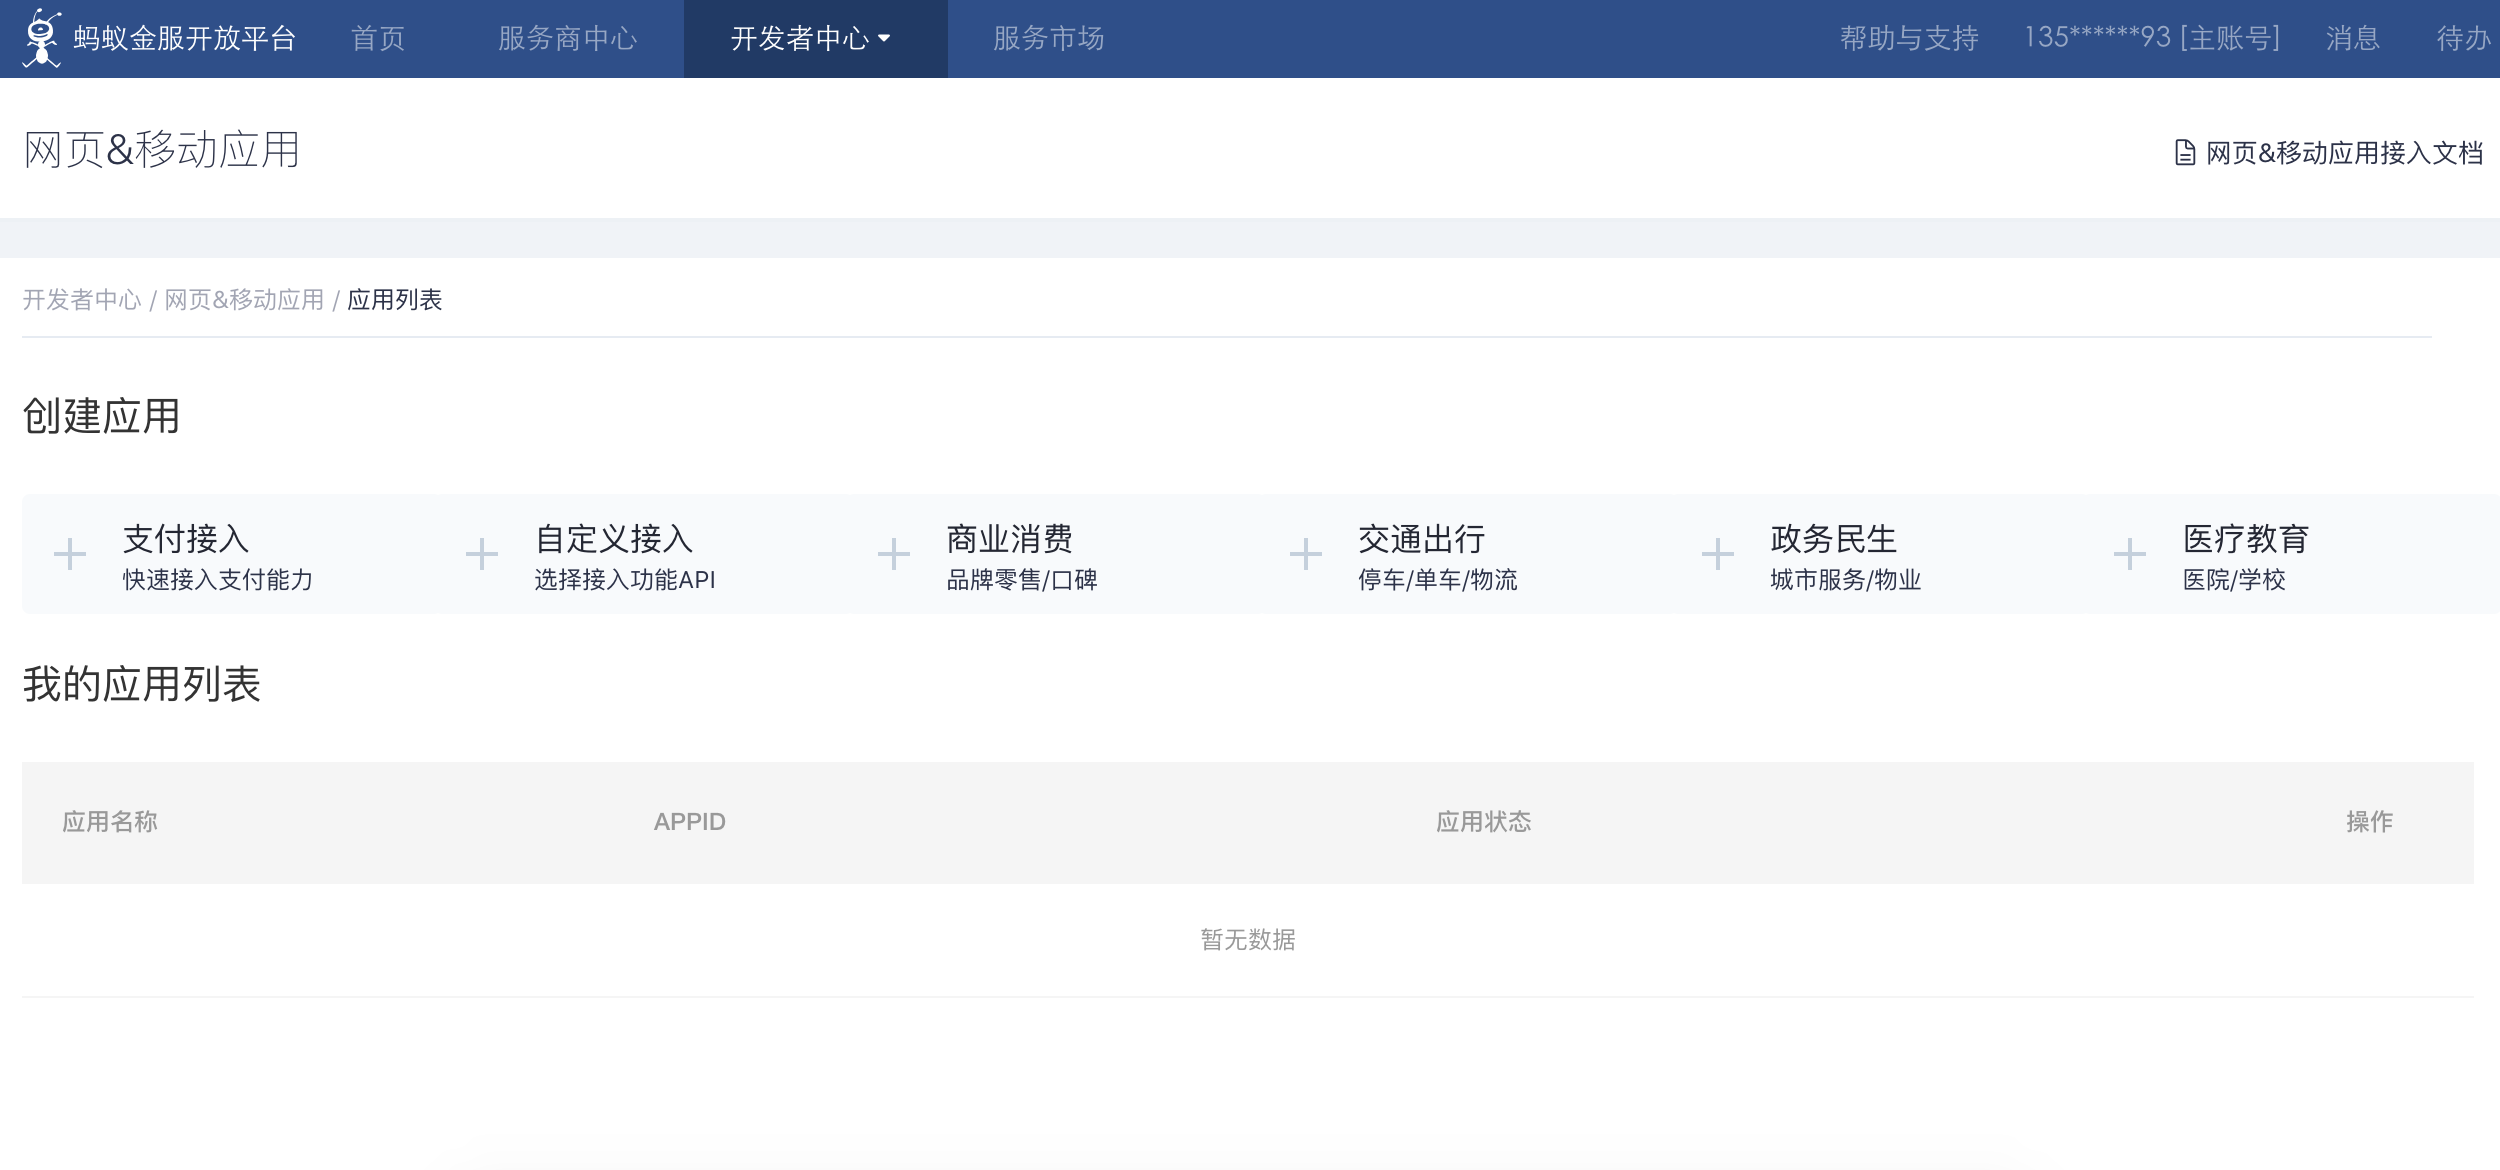 Day91-100/res/alipay_web_developer.png